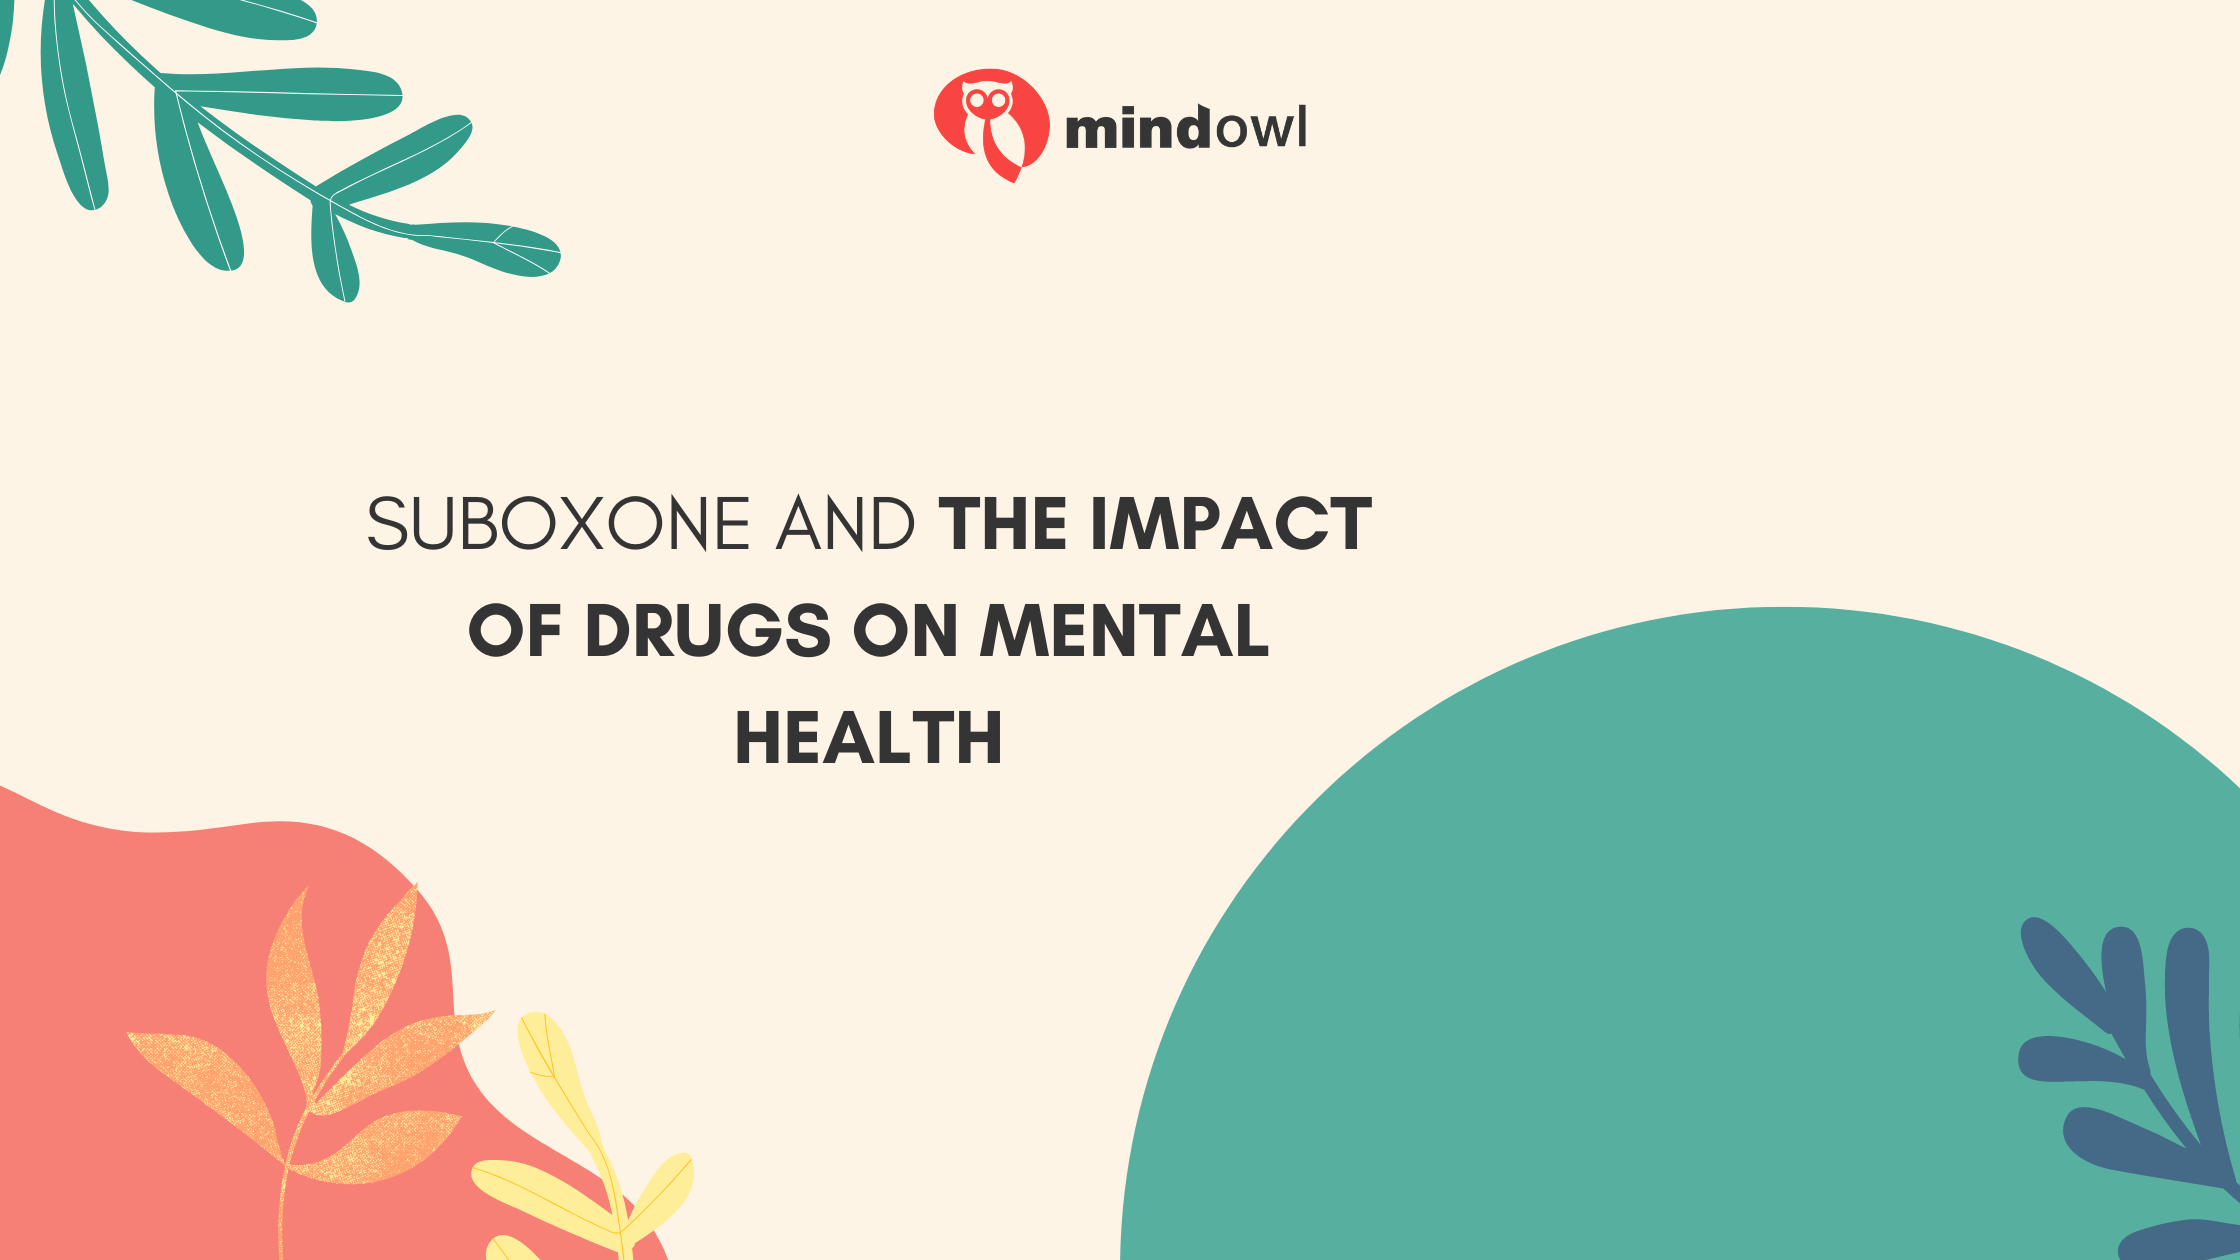 Suboxone and the impact of drugs on mental health